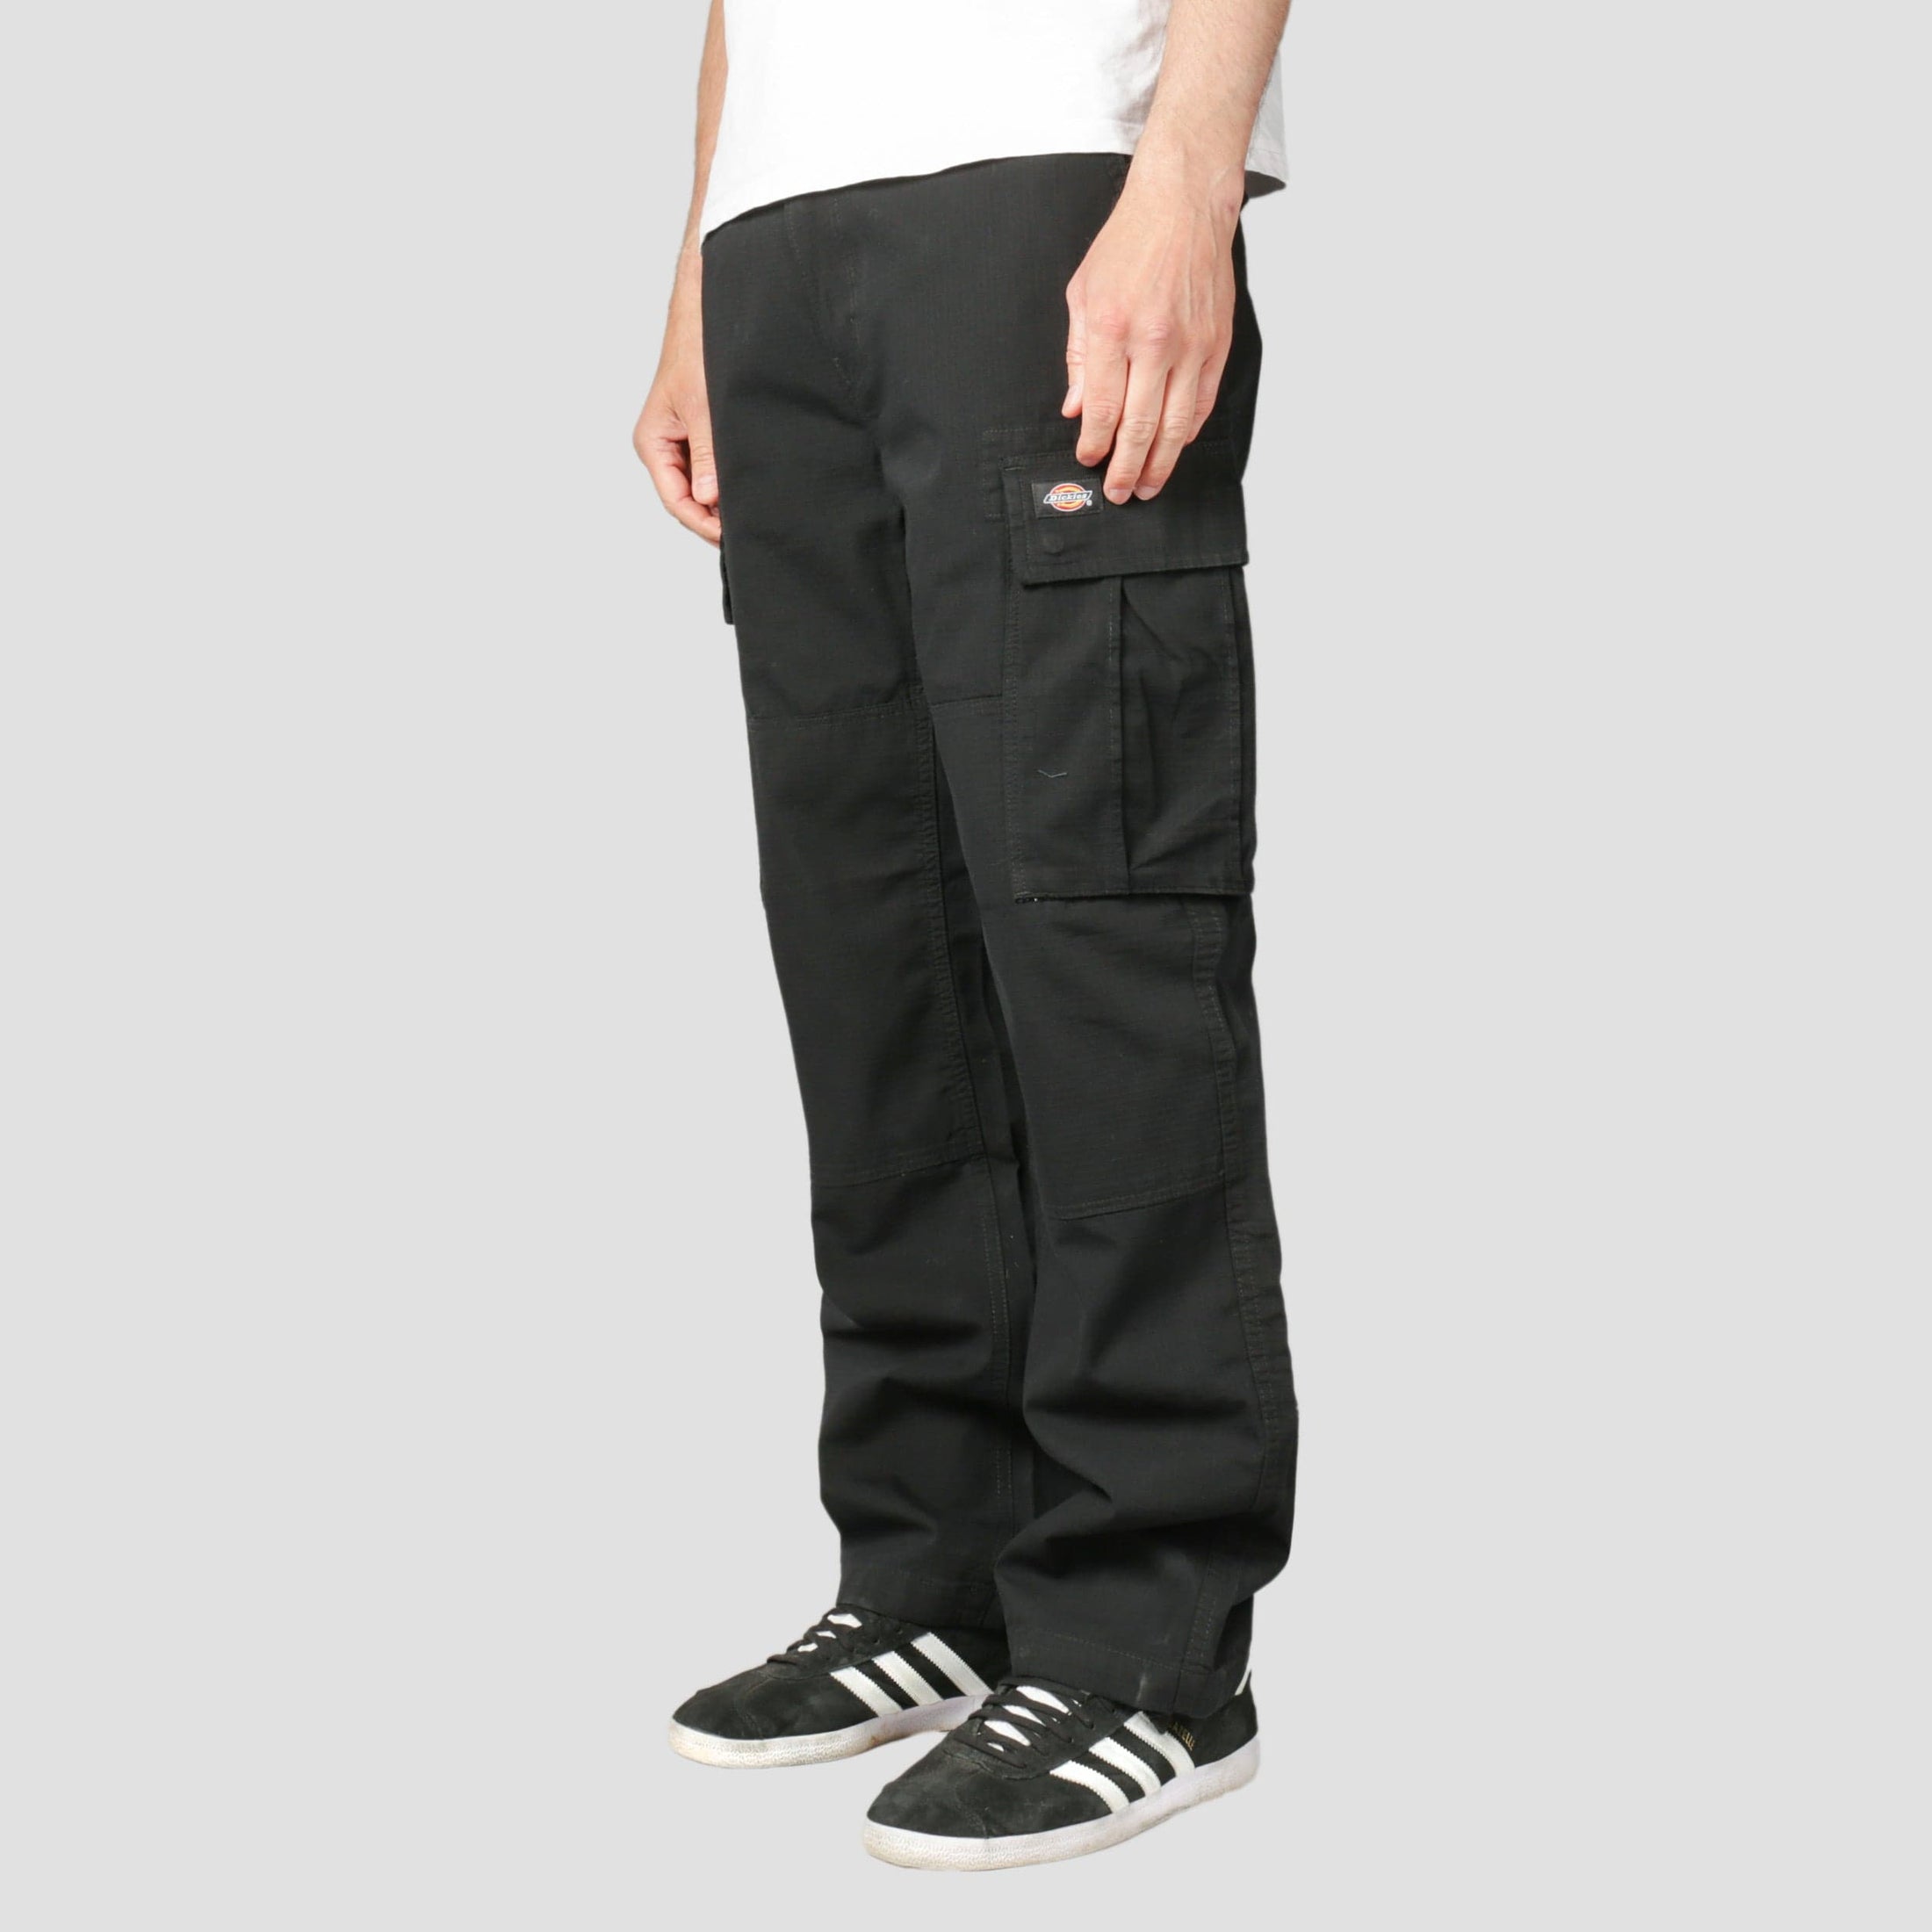 Dickies Eagle Bend Cargo Pant - Military Green